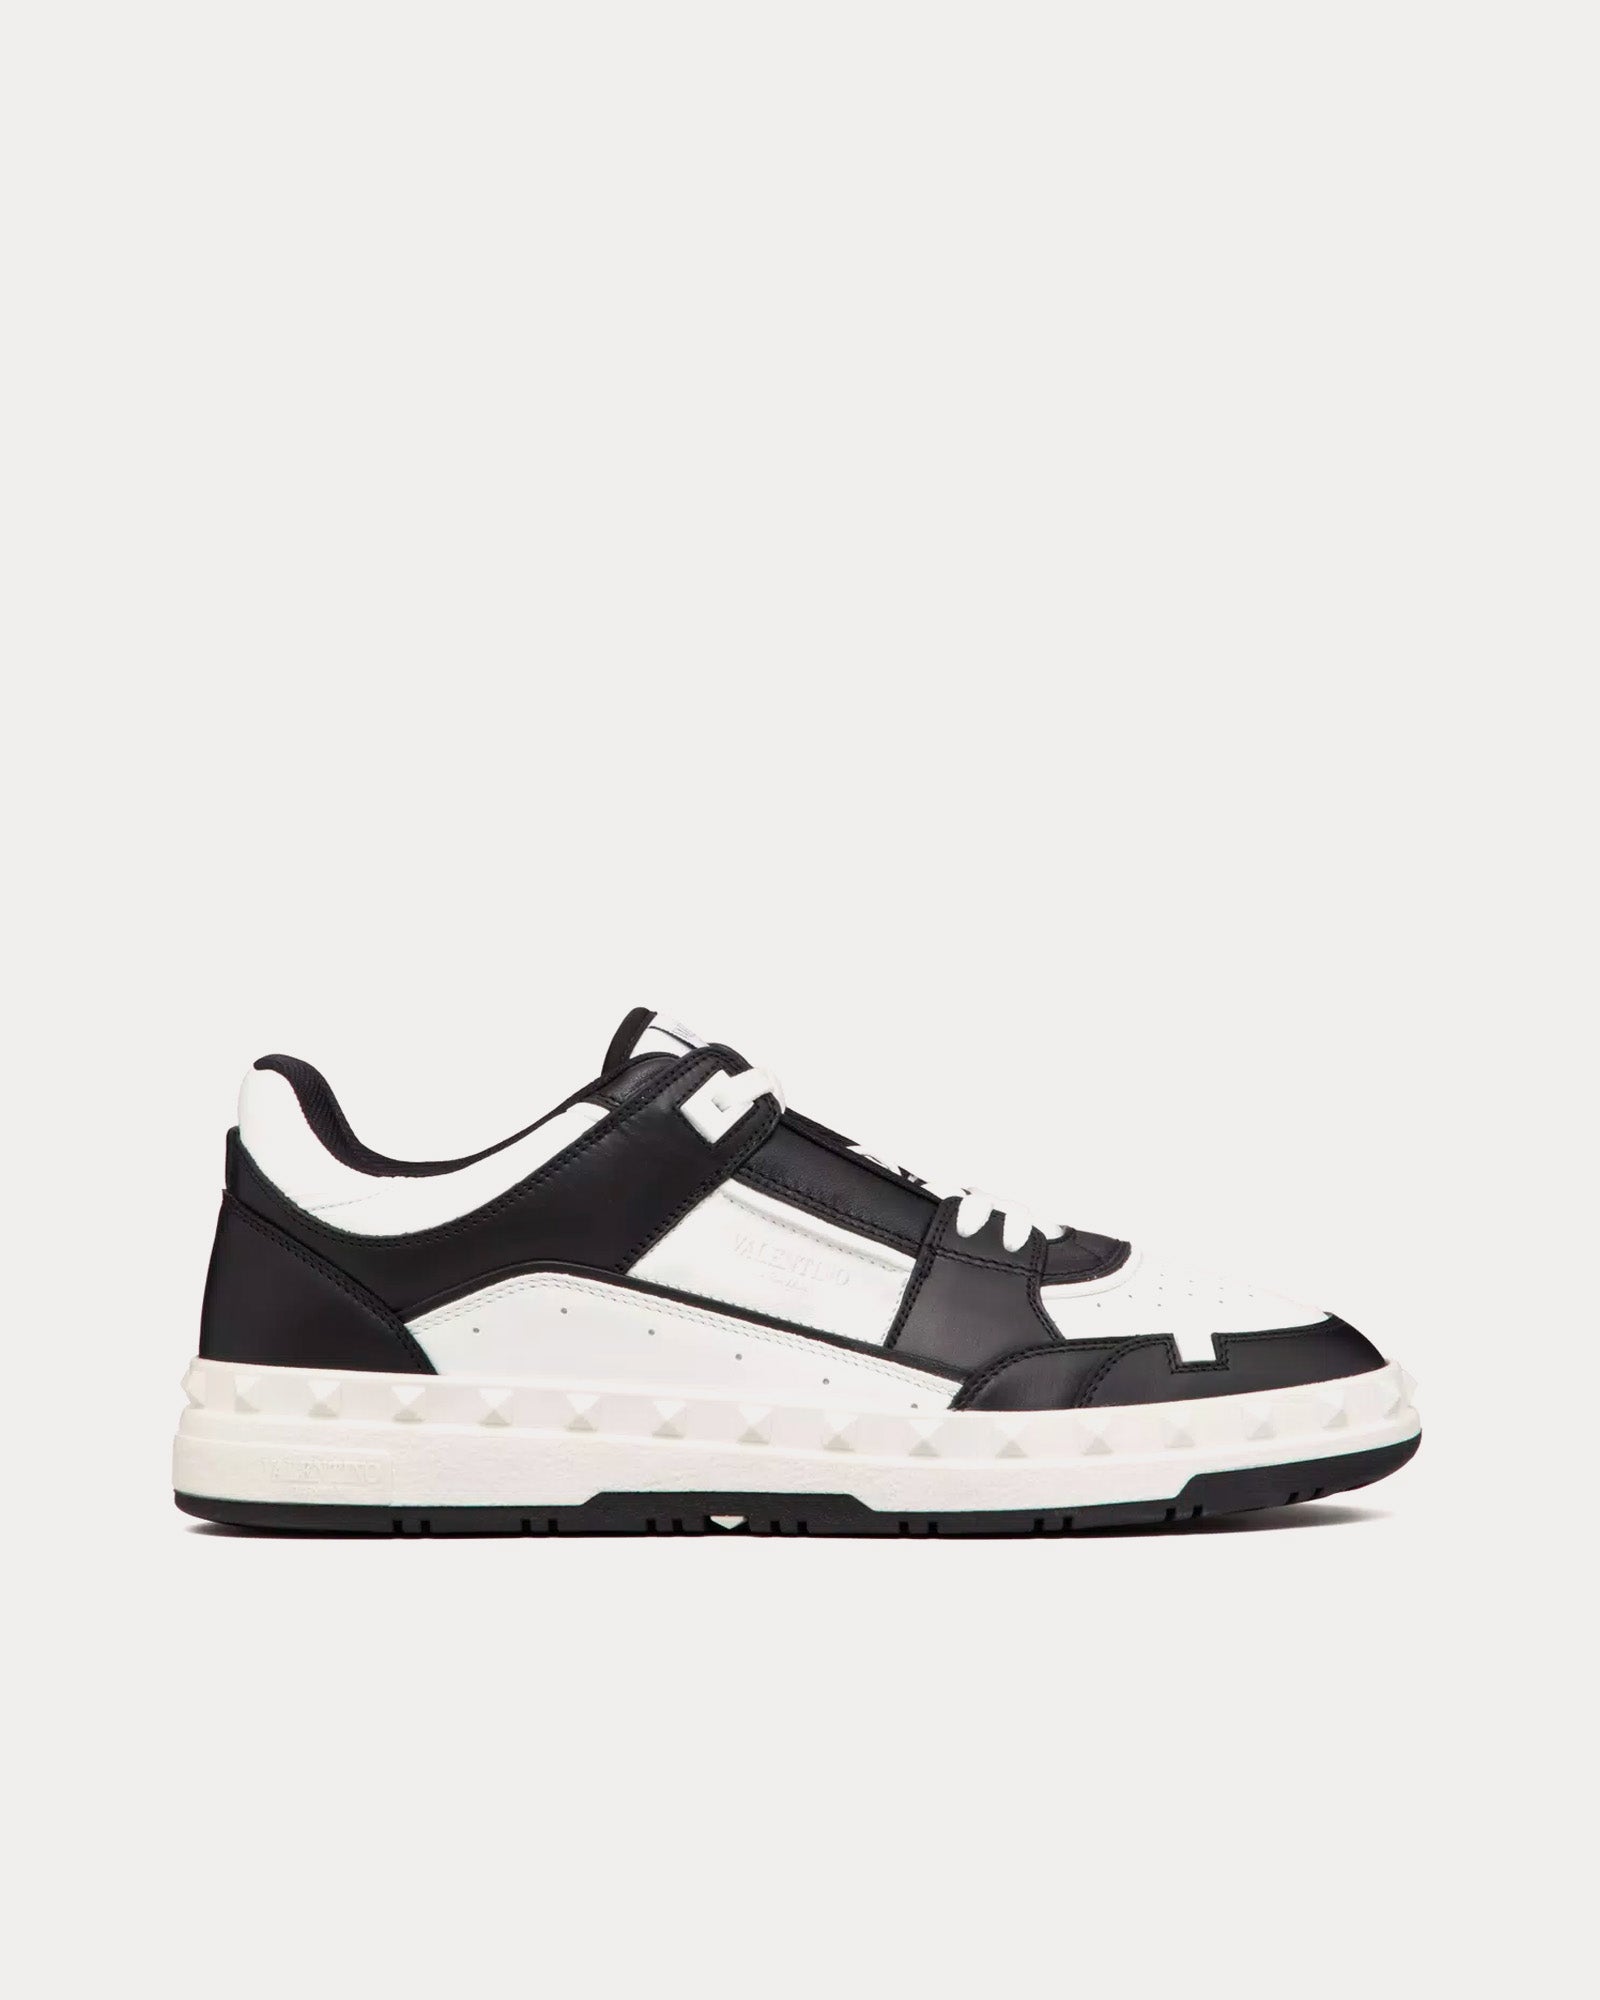 Valentino - Freedots Calfskin Black / White Low Top Sneakers